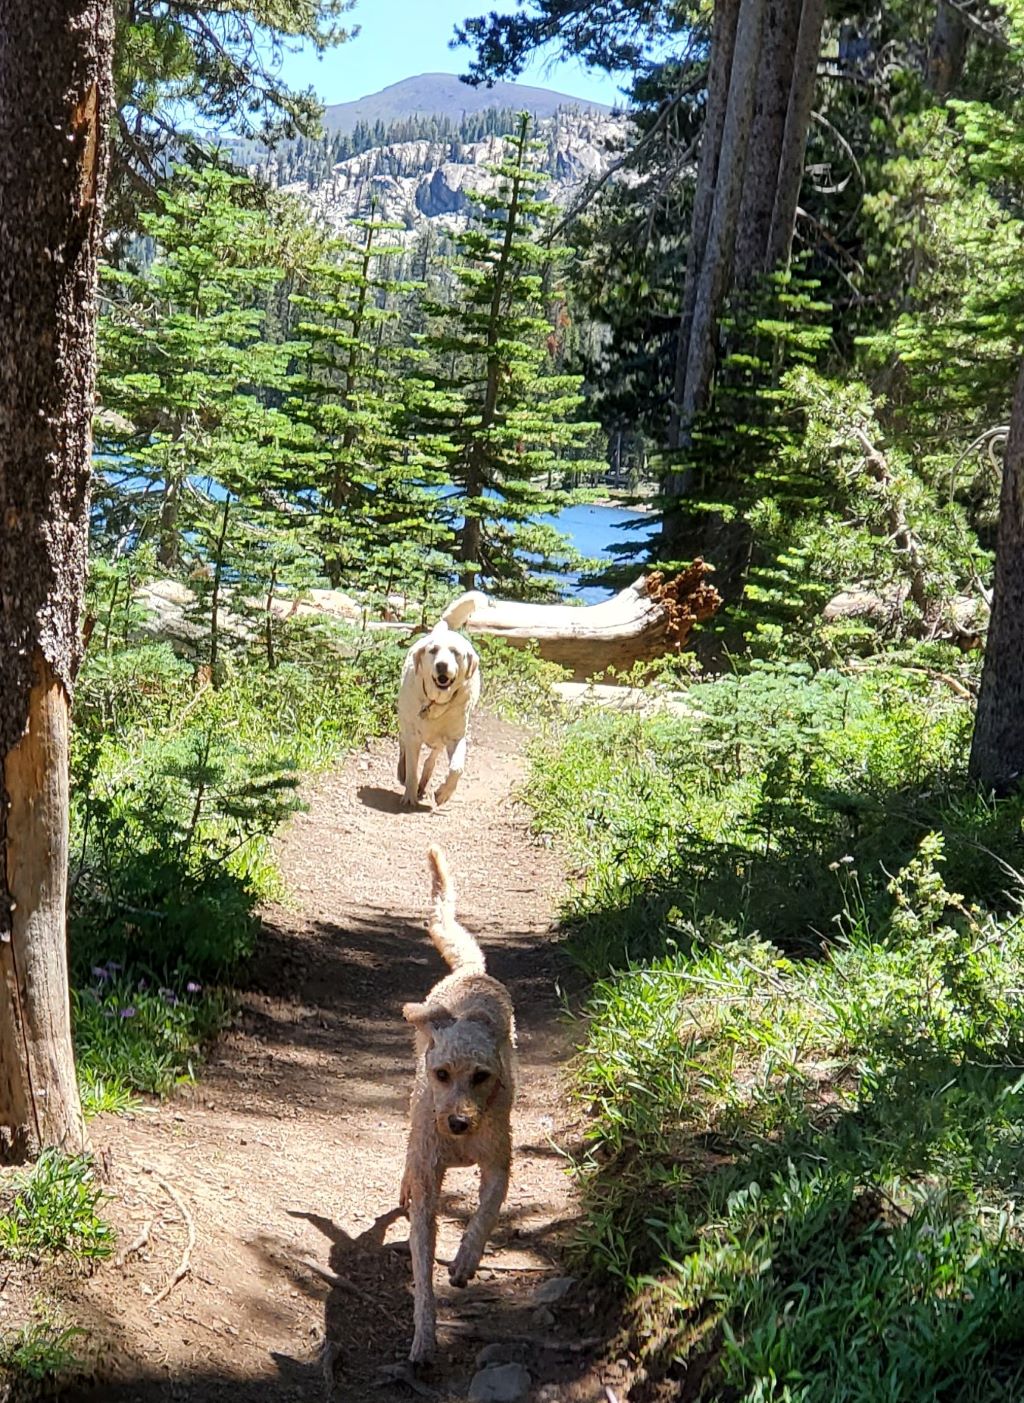 Sierra lakes hikes with dogs